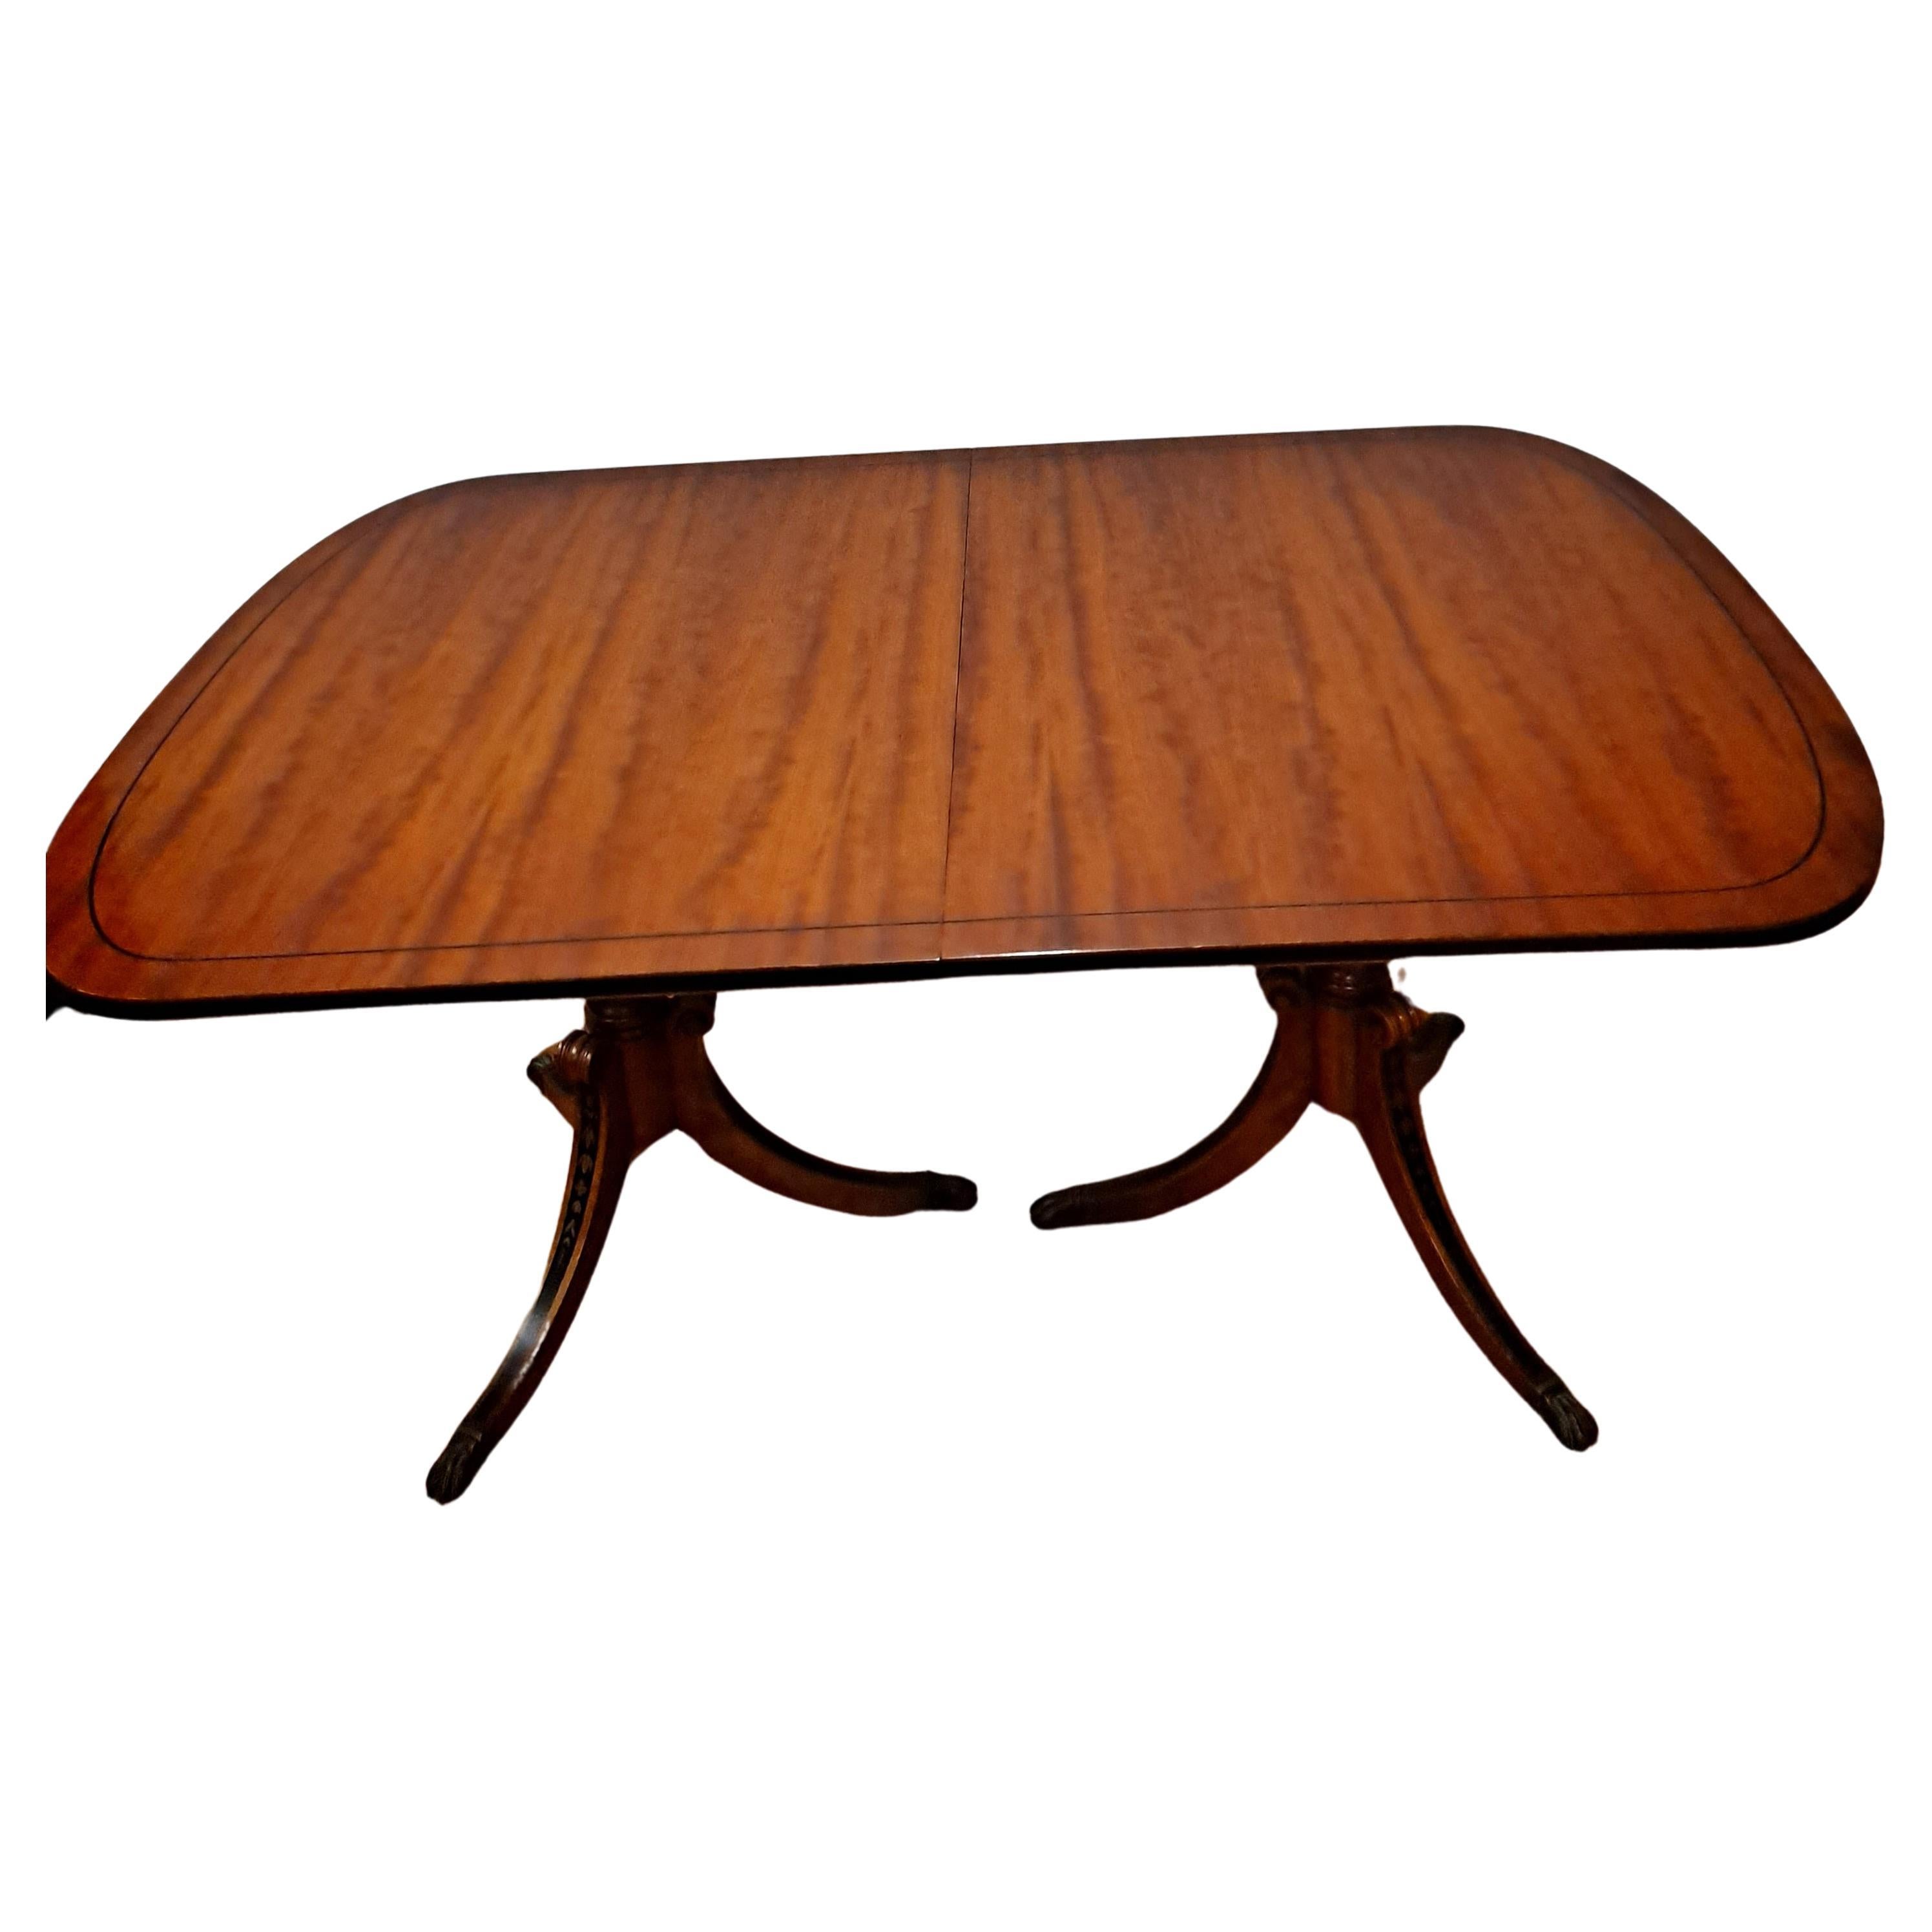 Early 20th Century Double Pedestal Mahogany Table with Extension Leaf For Sale